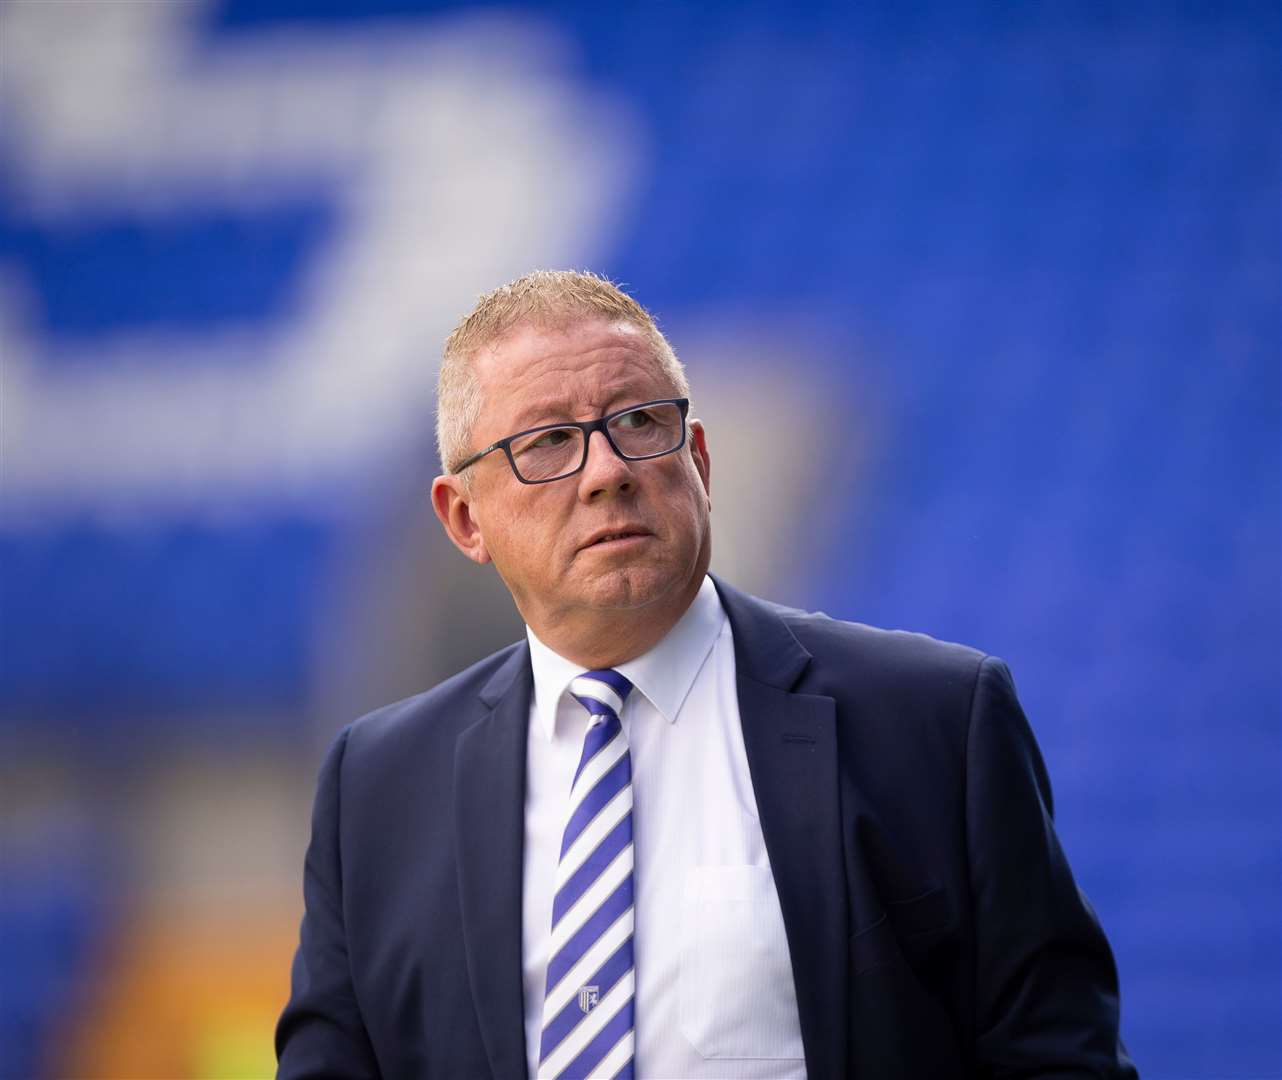 Gillingham chairman Paul Scally tells critics that he is going after them  following defamatory comments